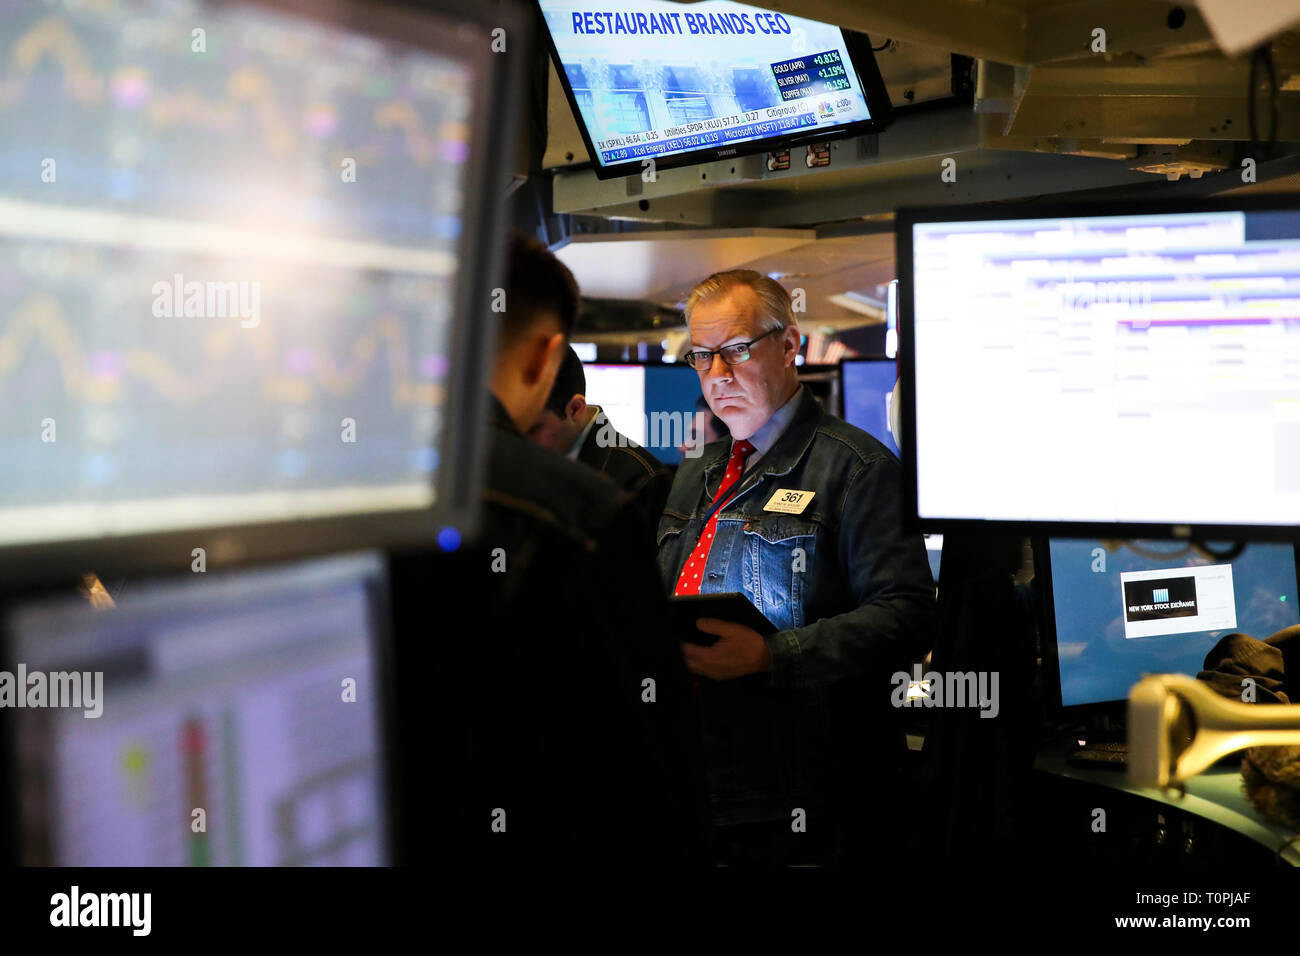 New York, USA. 21st Mar, 2019. Traders wearing denim clothing and jeans work at the New York Stock Exchange (NYSE) during the initial public offering (IPO) of Levi Strauss & Co., in New York, the United States, March 21, 2019. Blue jeans giant Levi Strauss & Co. began trading on the NYSE on Thurday. The 166-year-old company first went public in 1971, but has been private for the last 34 years. Credit: Wang Ying/Xinhua/Alamy Live News Stock Photo